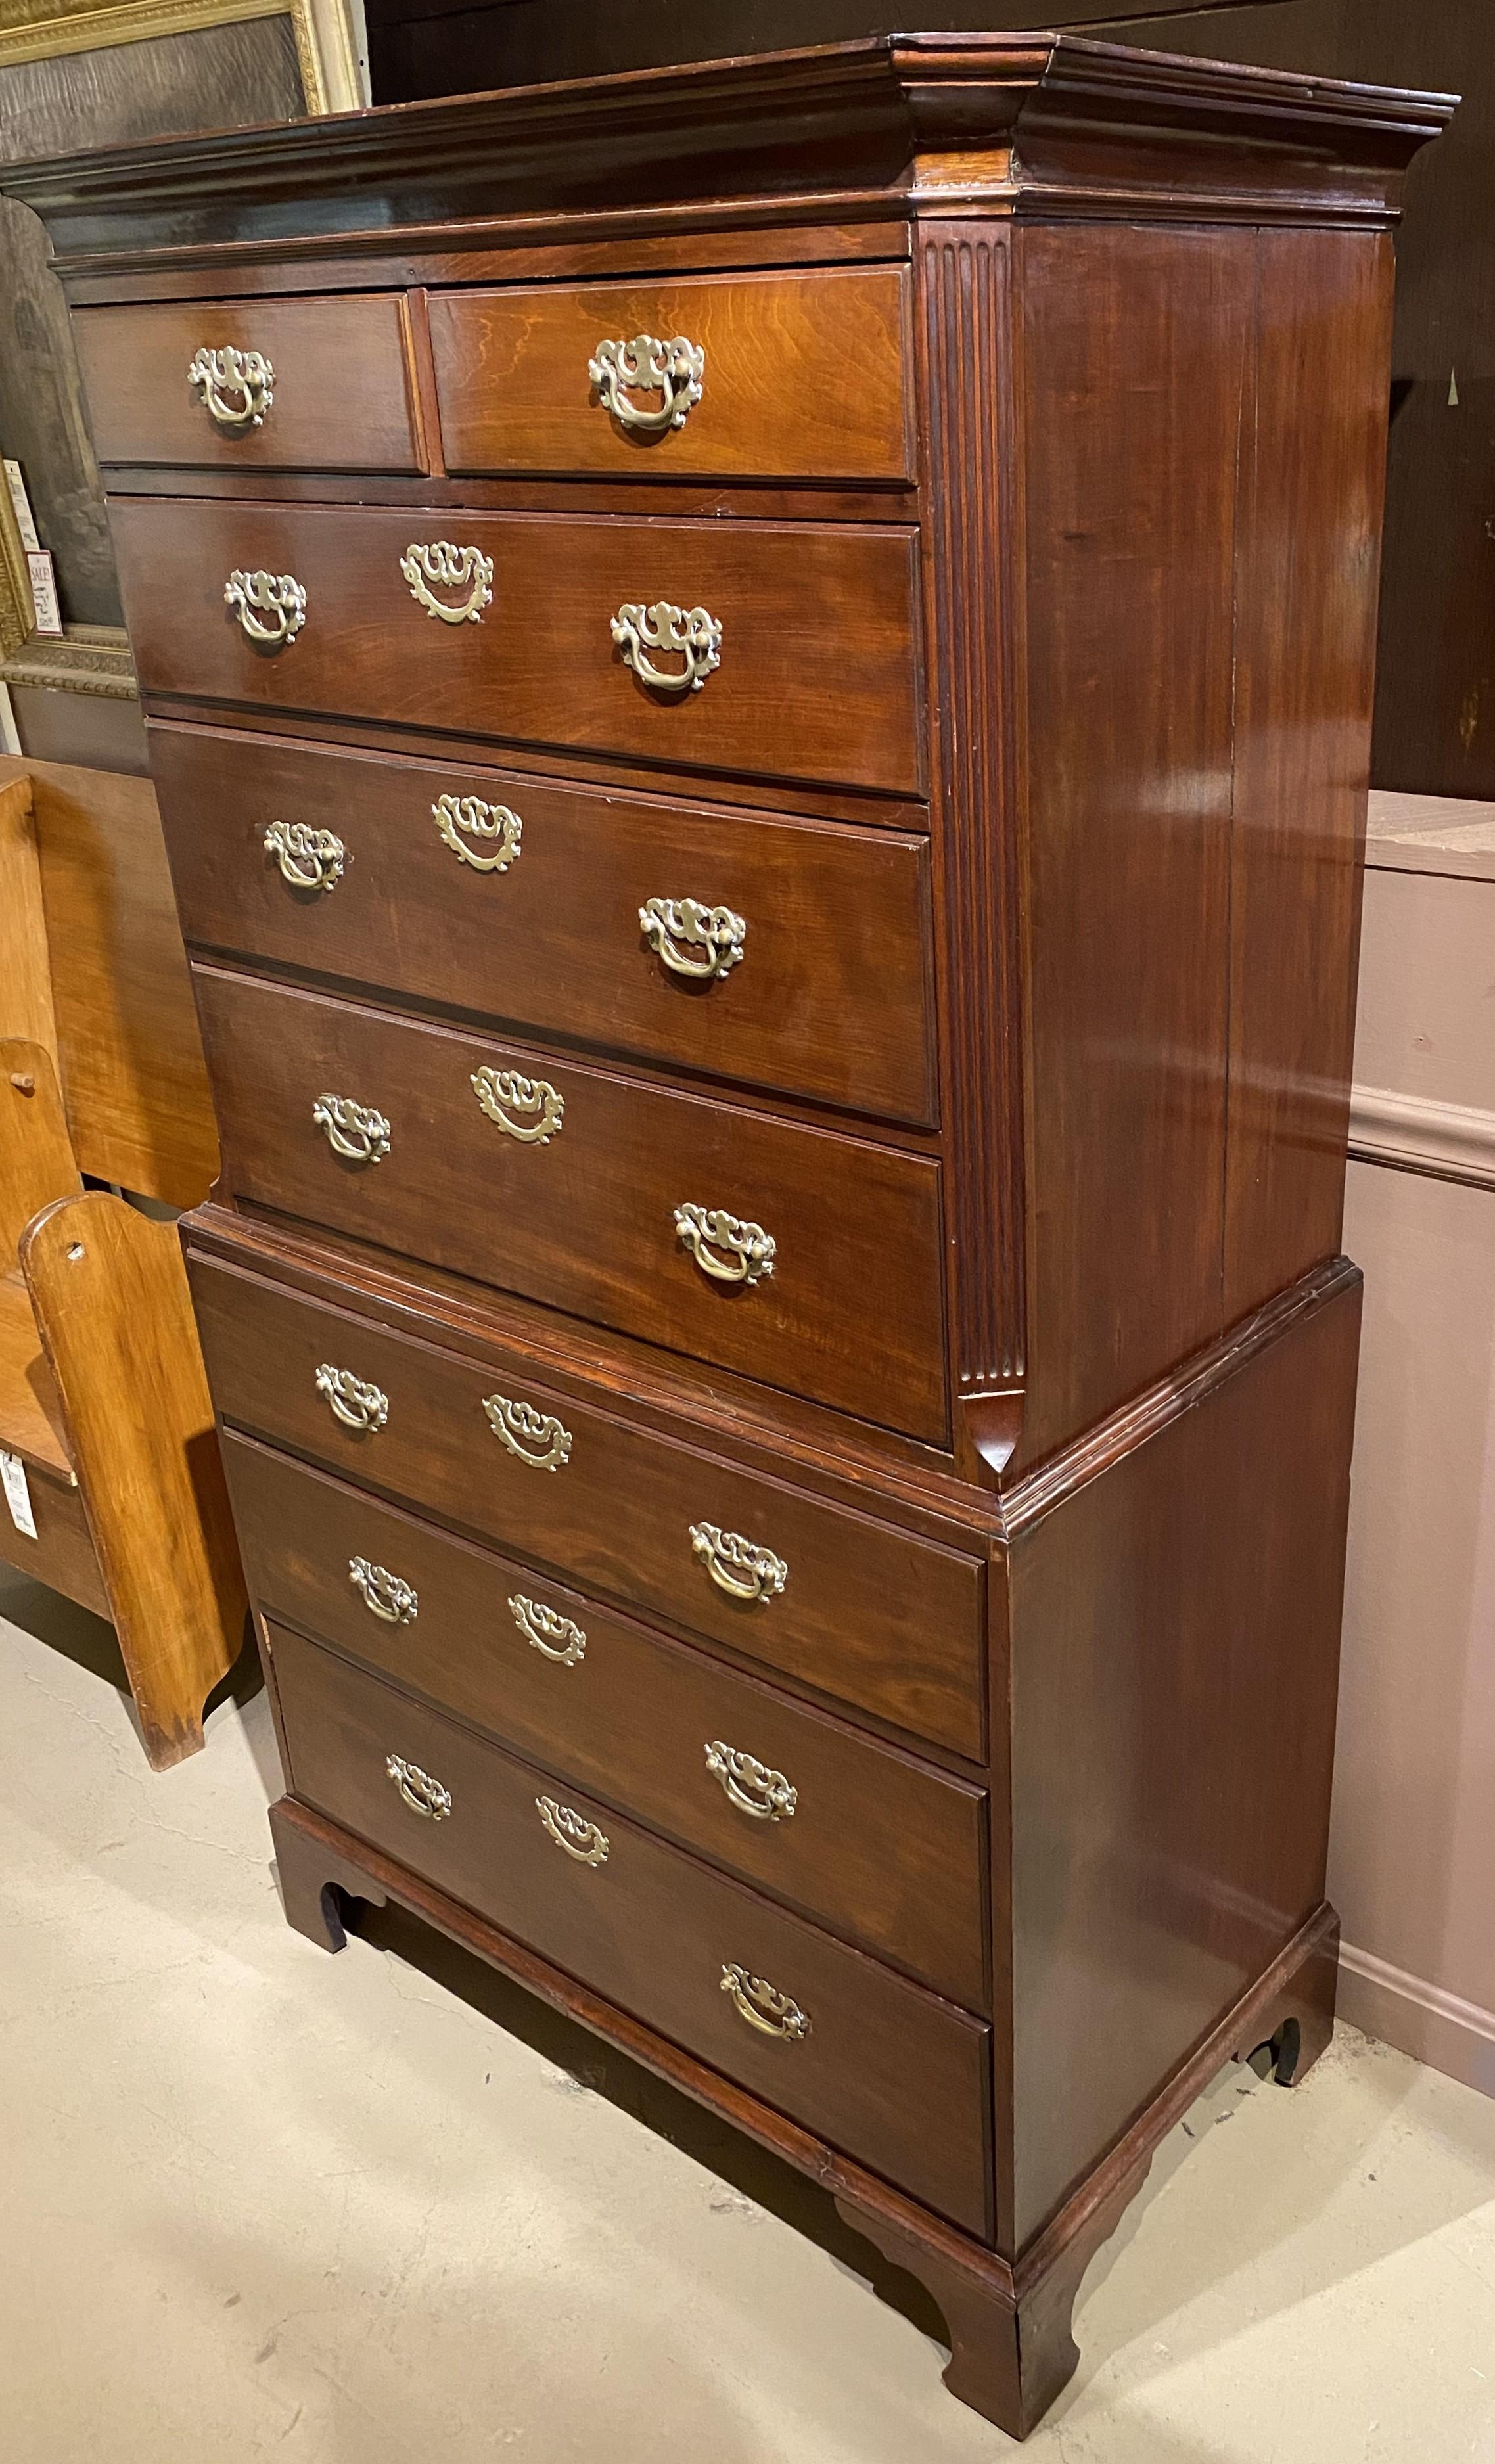 A fine English Chippendale mahogany two part chest on chest, its upper case with a molded cornice surmounting a two over three drawer configuration, flanked by canted reeded corners, over a lower case with three long drawers, all with what appear to